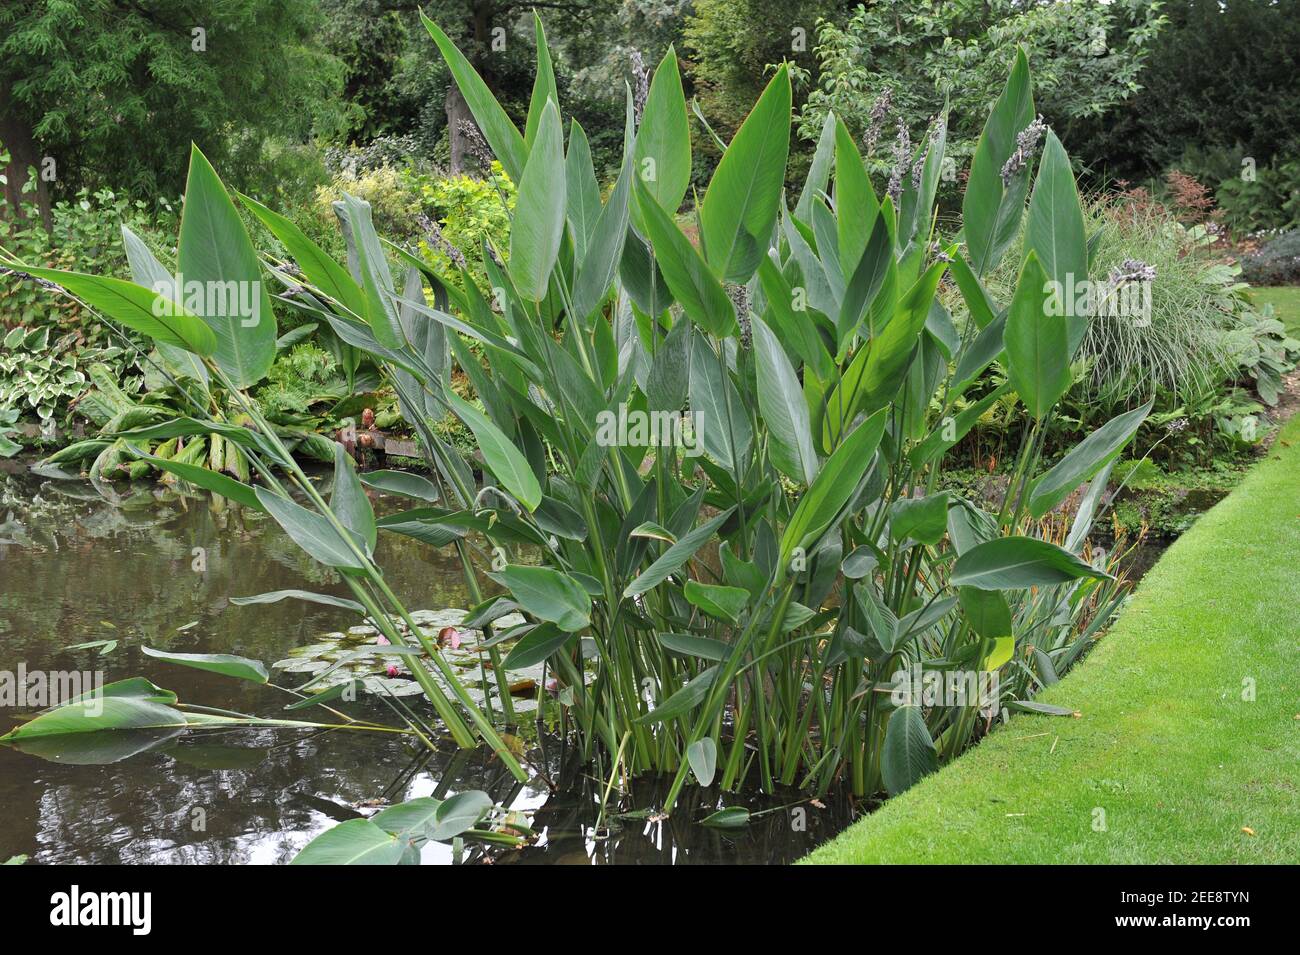 Planted in water powdery alligator-flag (Thalia dealbata) blooms in a pond in a garden in September Stock Photo